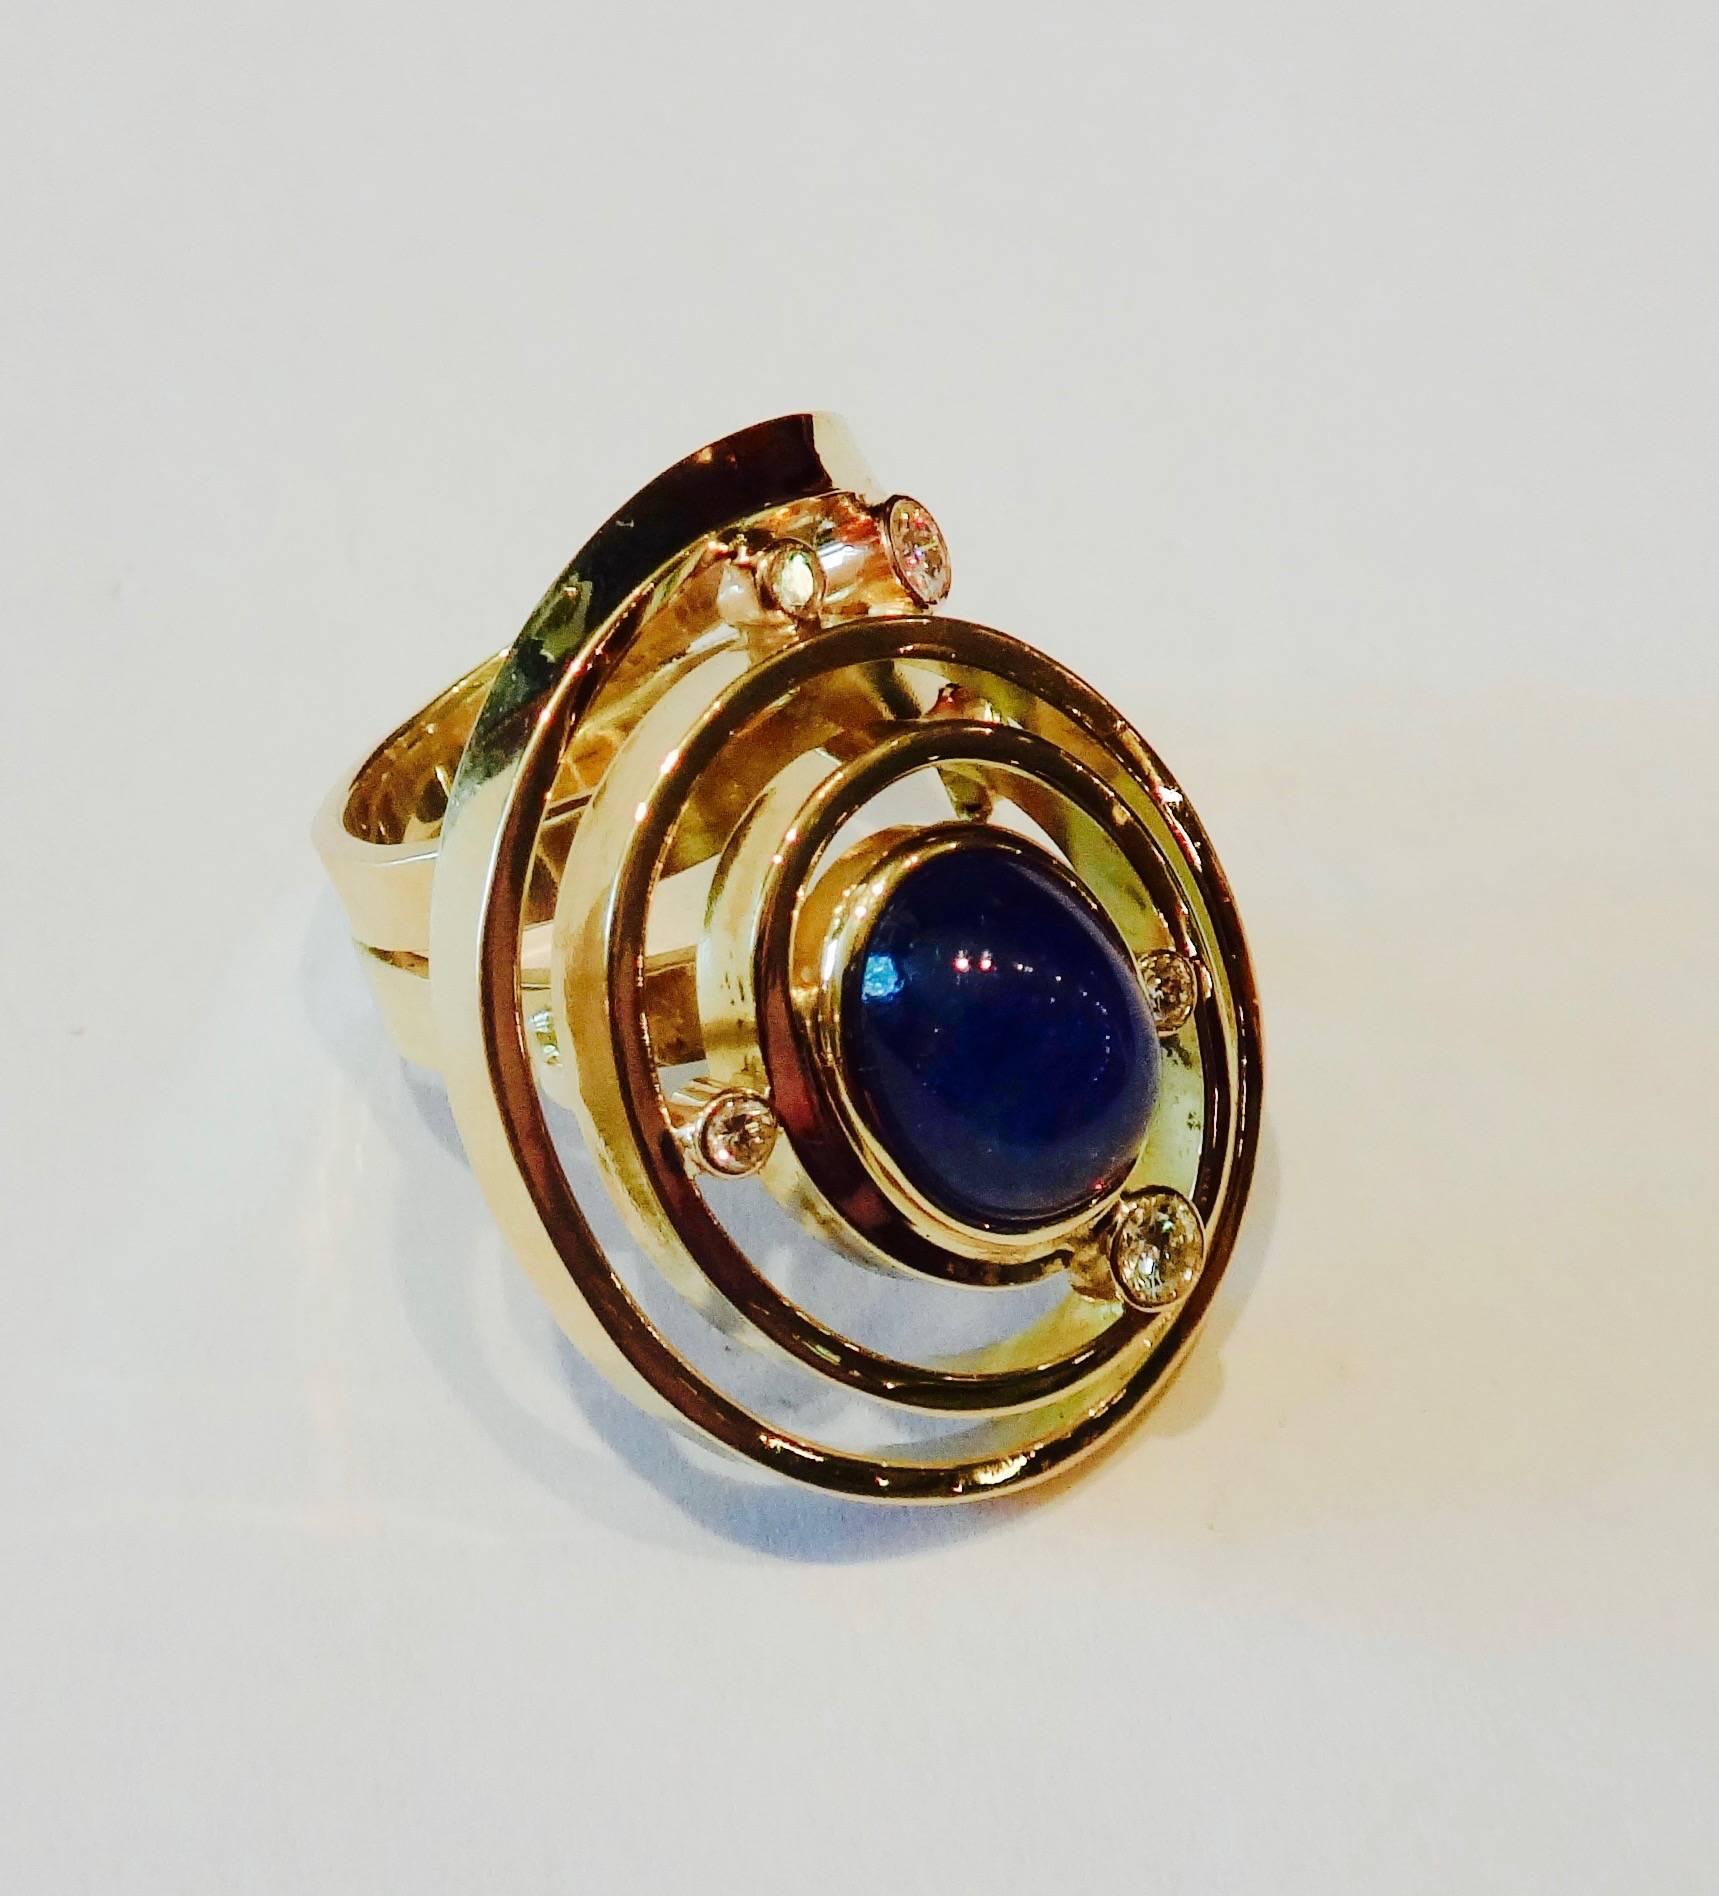 Inspired by the jewelry designs of Alexander Calder and specifically his wedding bands, this ring is fabricated for one continuous strip of hammered 18k yellow gold.  Set within the ring is an oval cabochon blue sapphire and 6 bezel set white